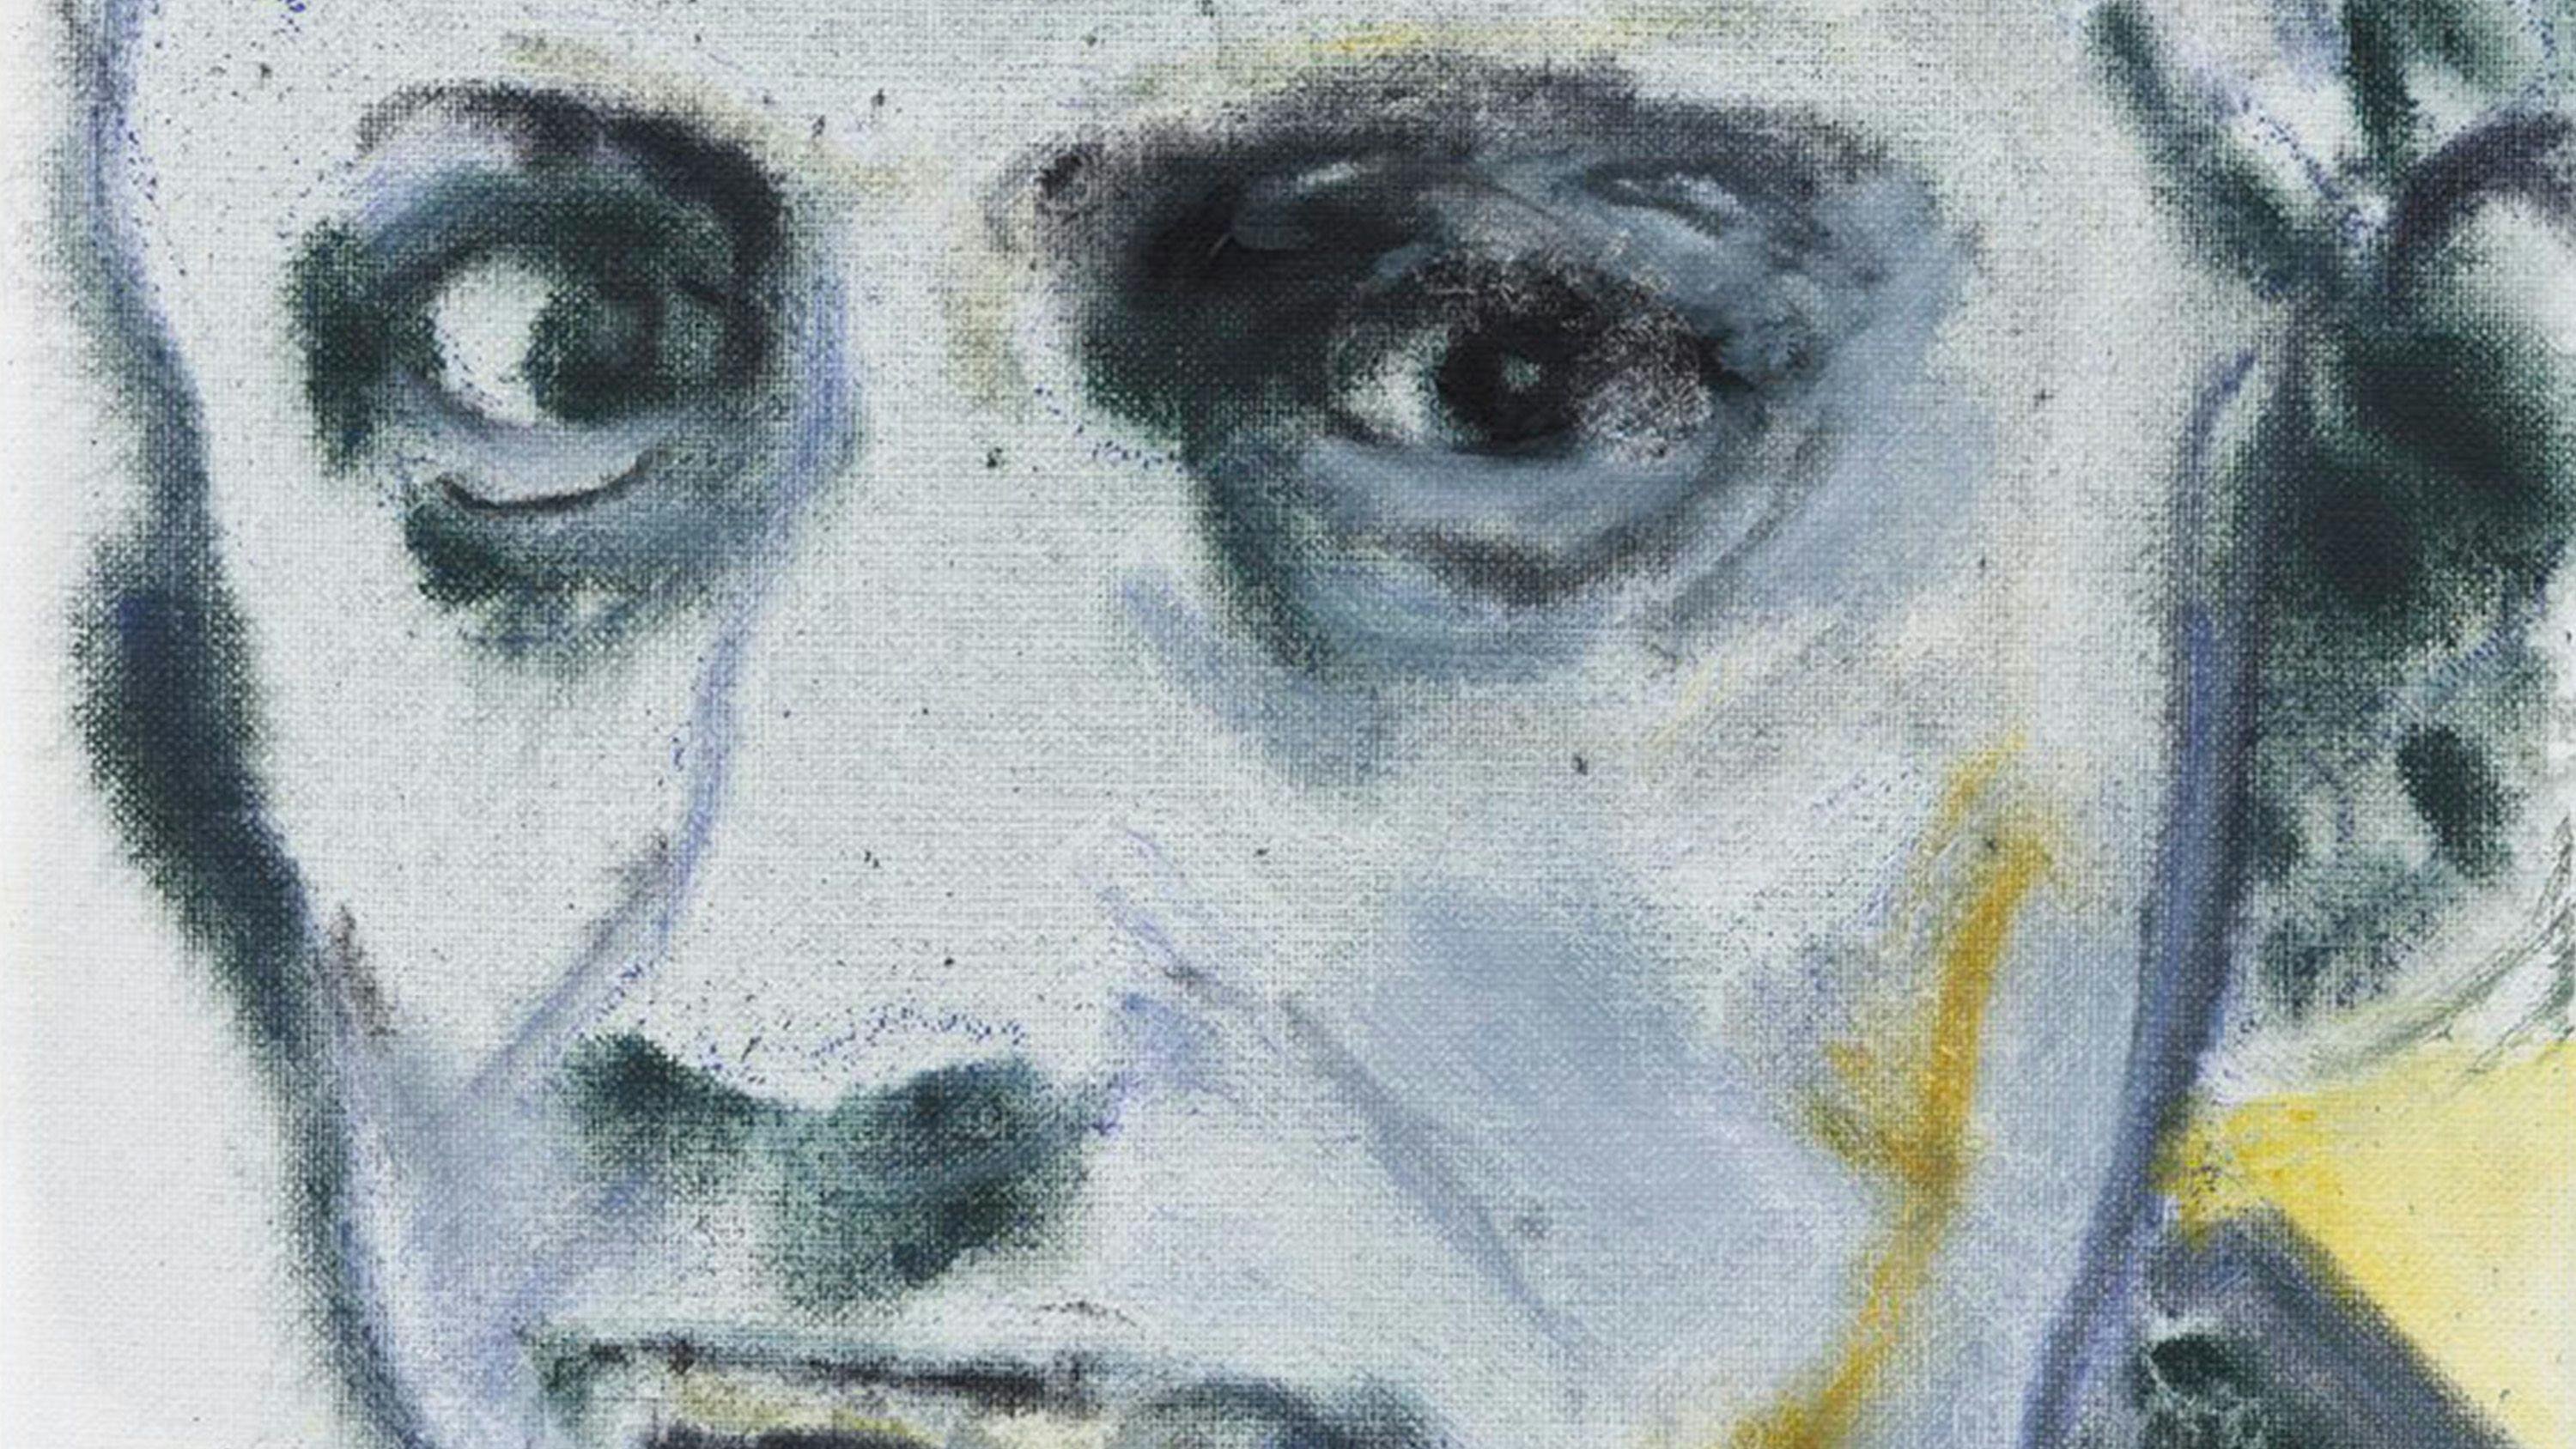 A detail of a painting by Marlene Dumas, titled Charles Baudelaire, dated 2020 